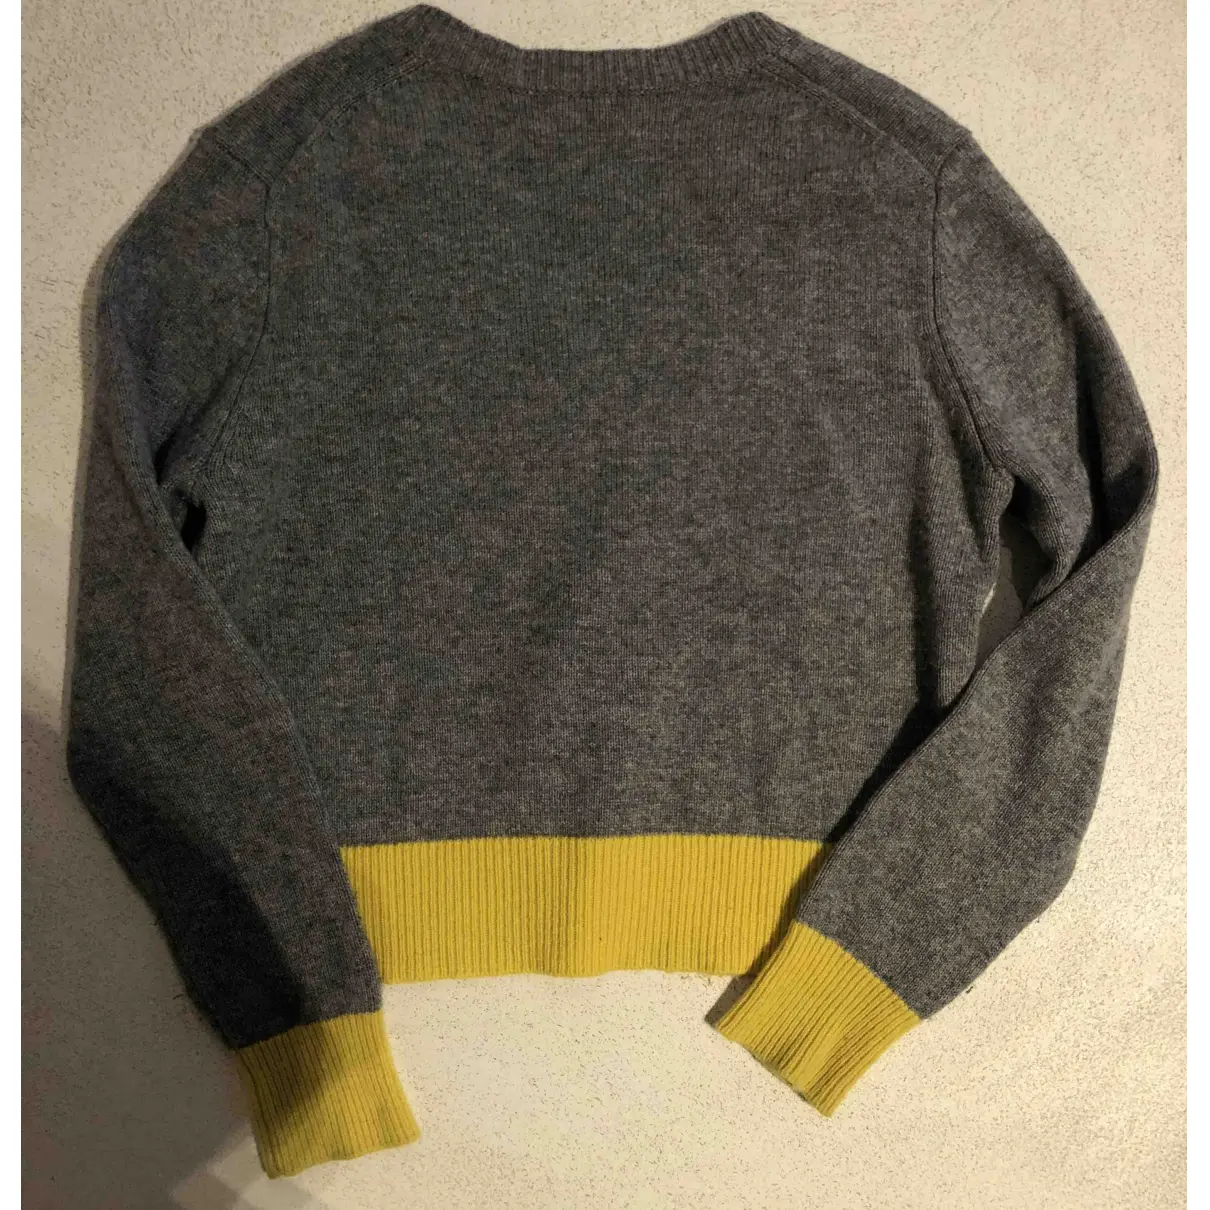 Buy From Future Cashmere jumper online